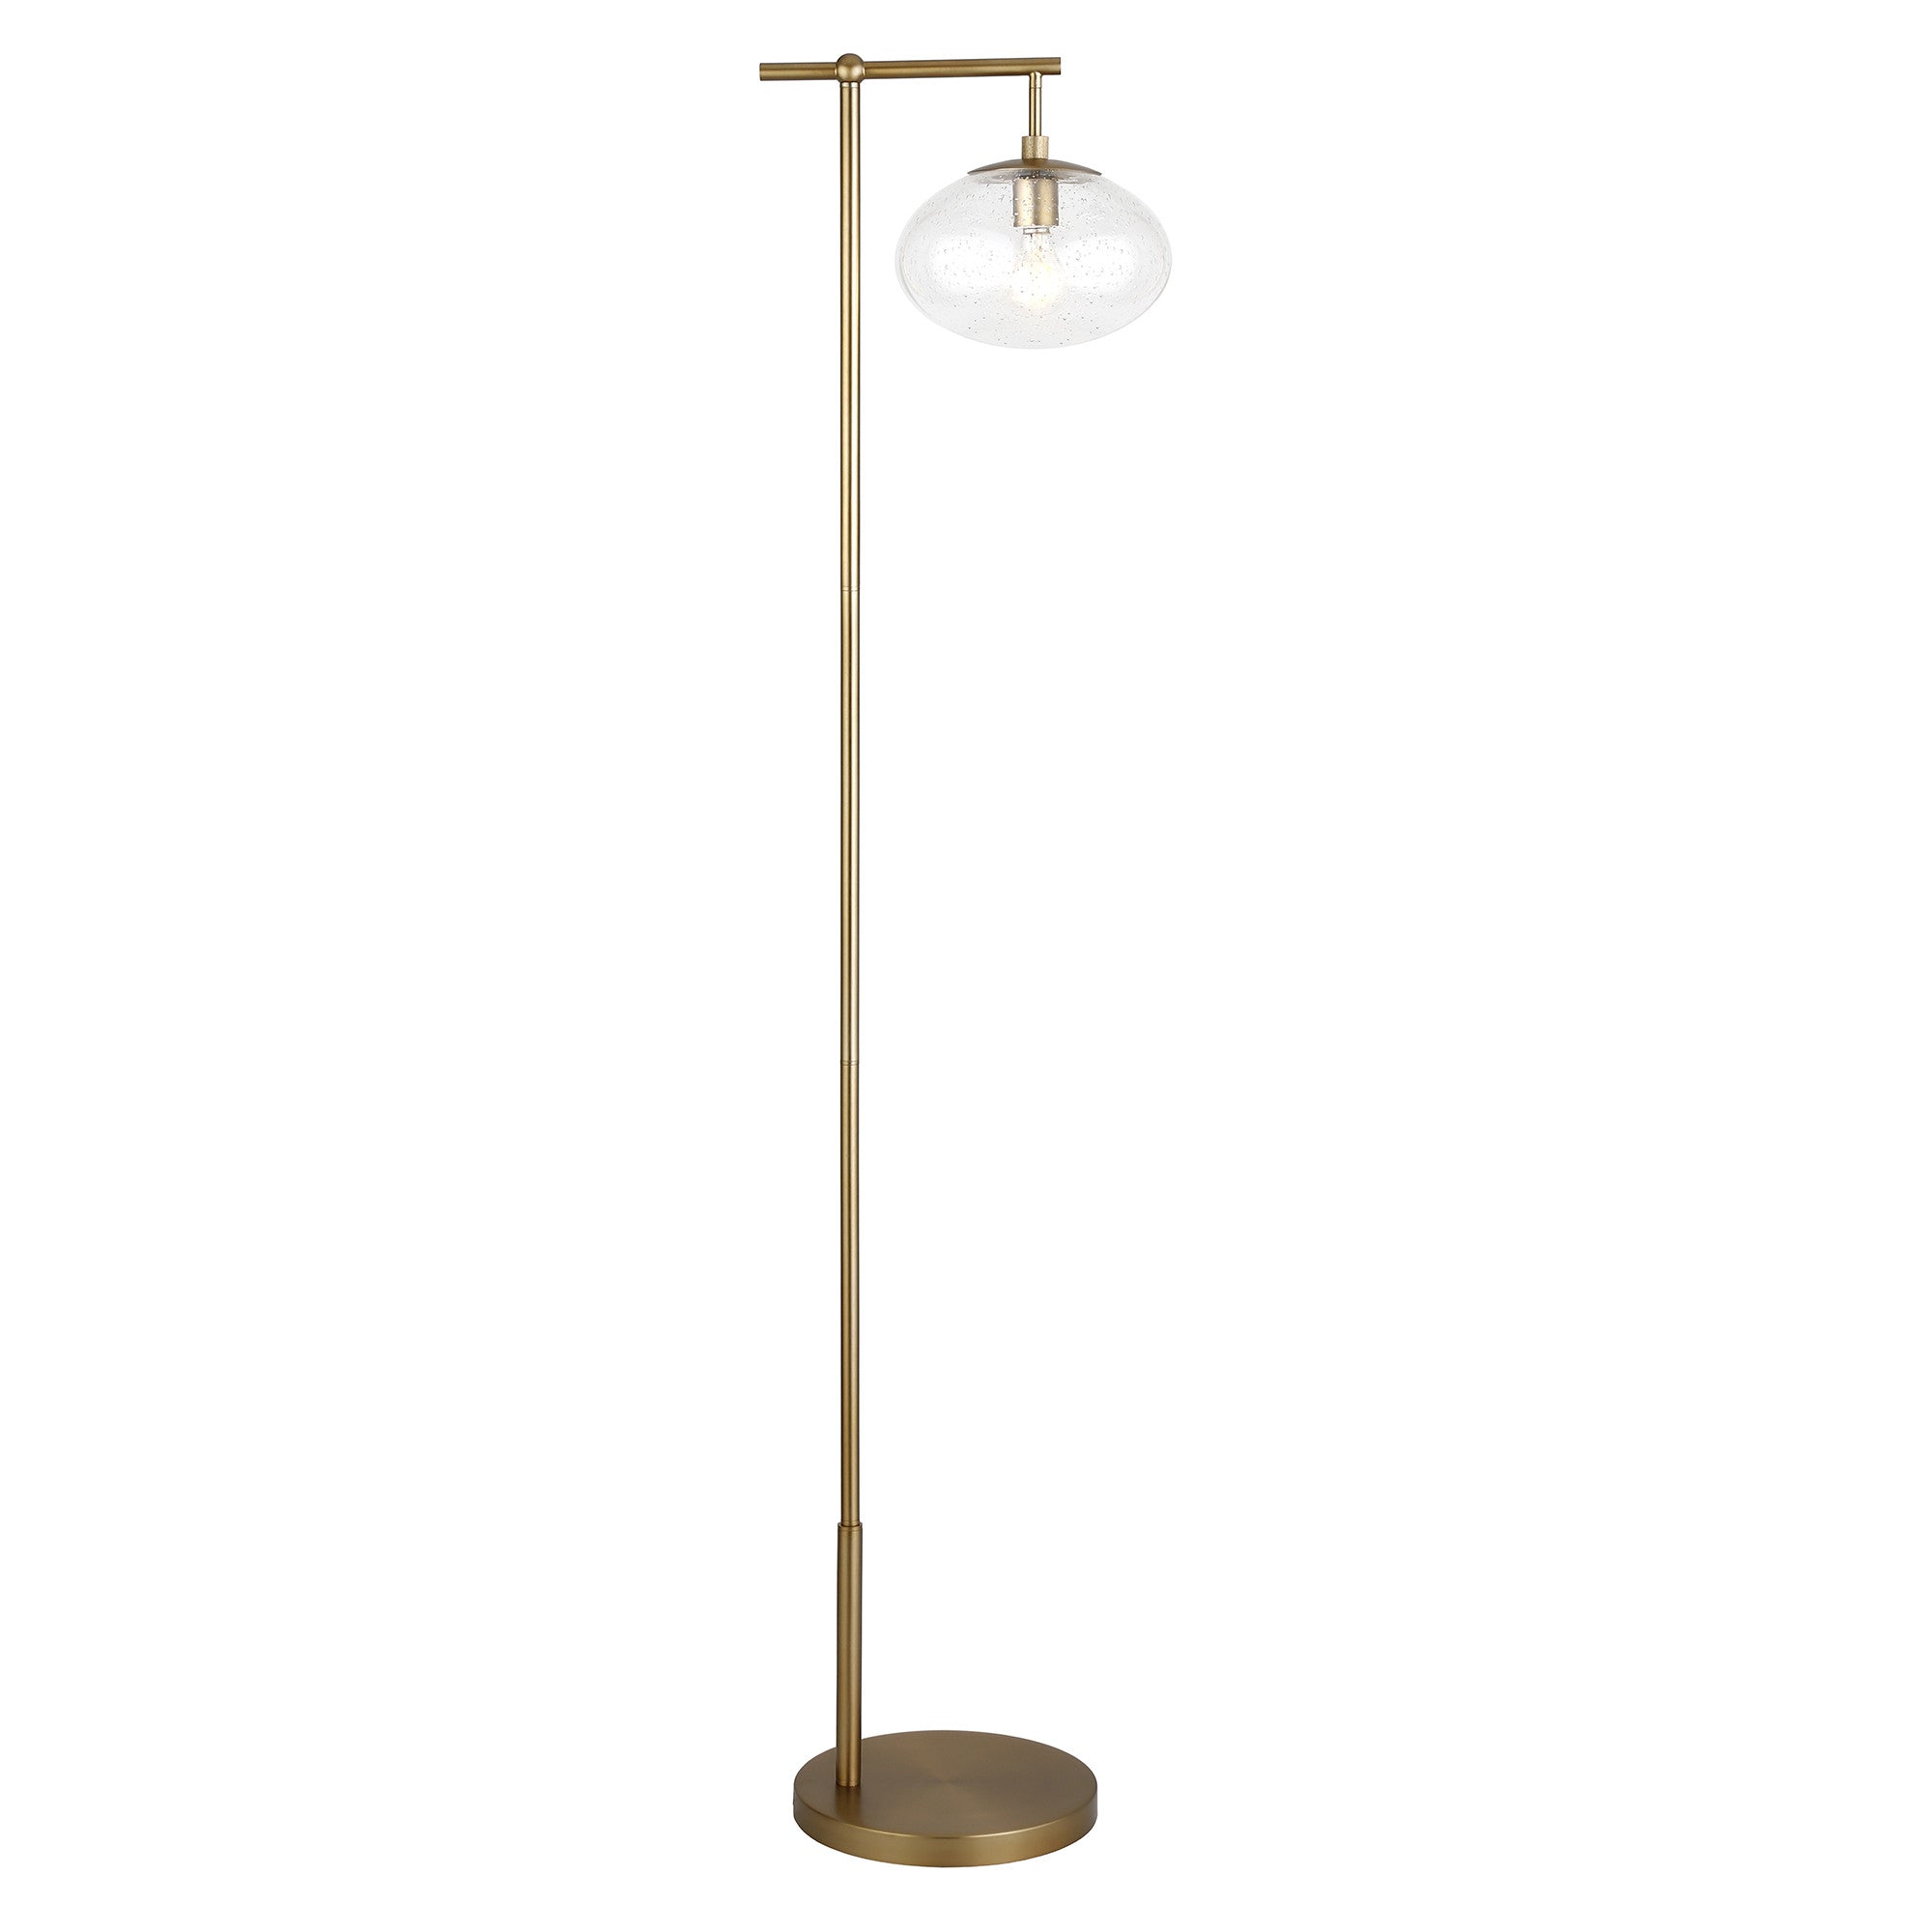 68" Brass Reading Floor Lamp With Clear Seeded Glass Globe Shade